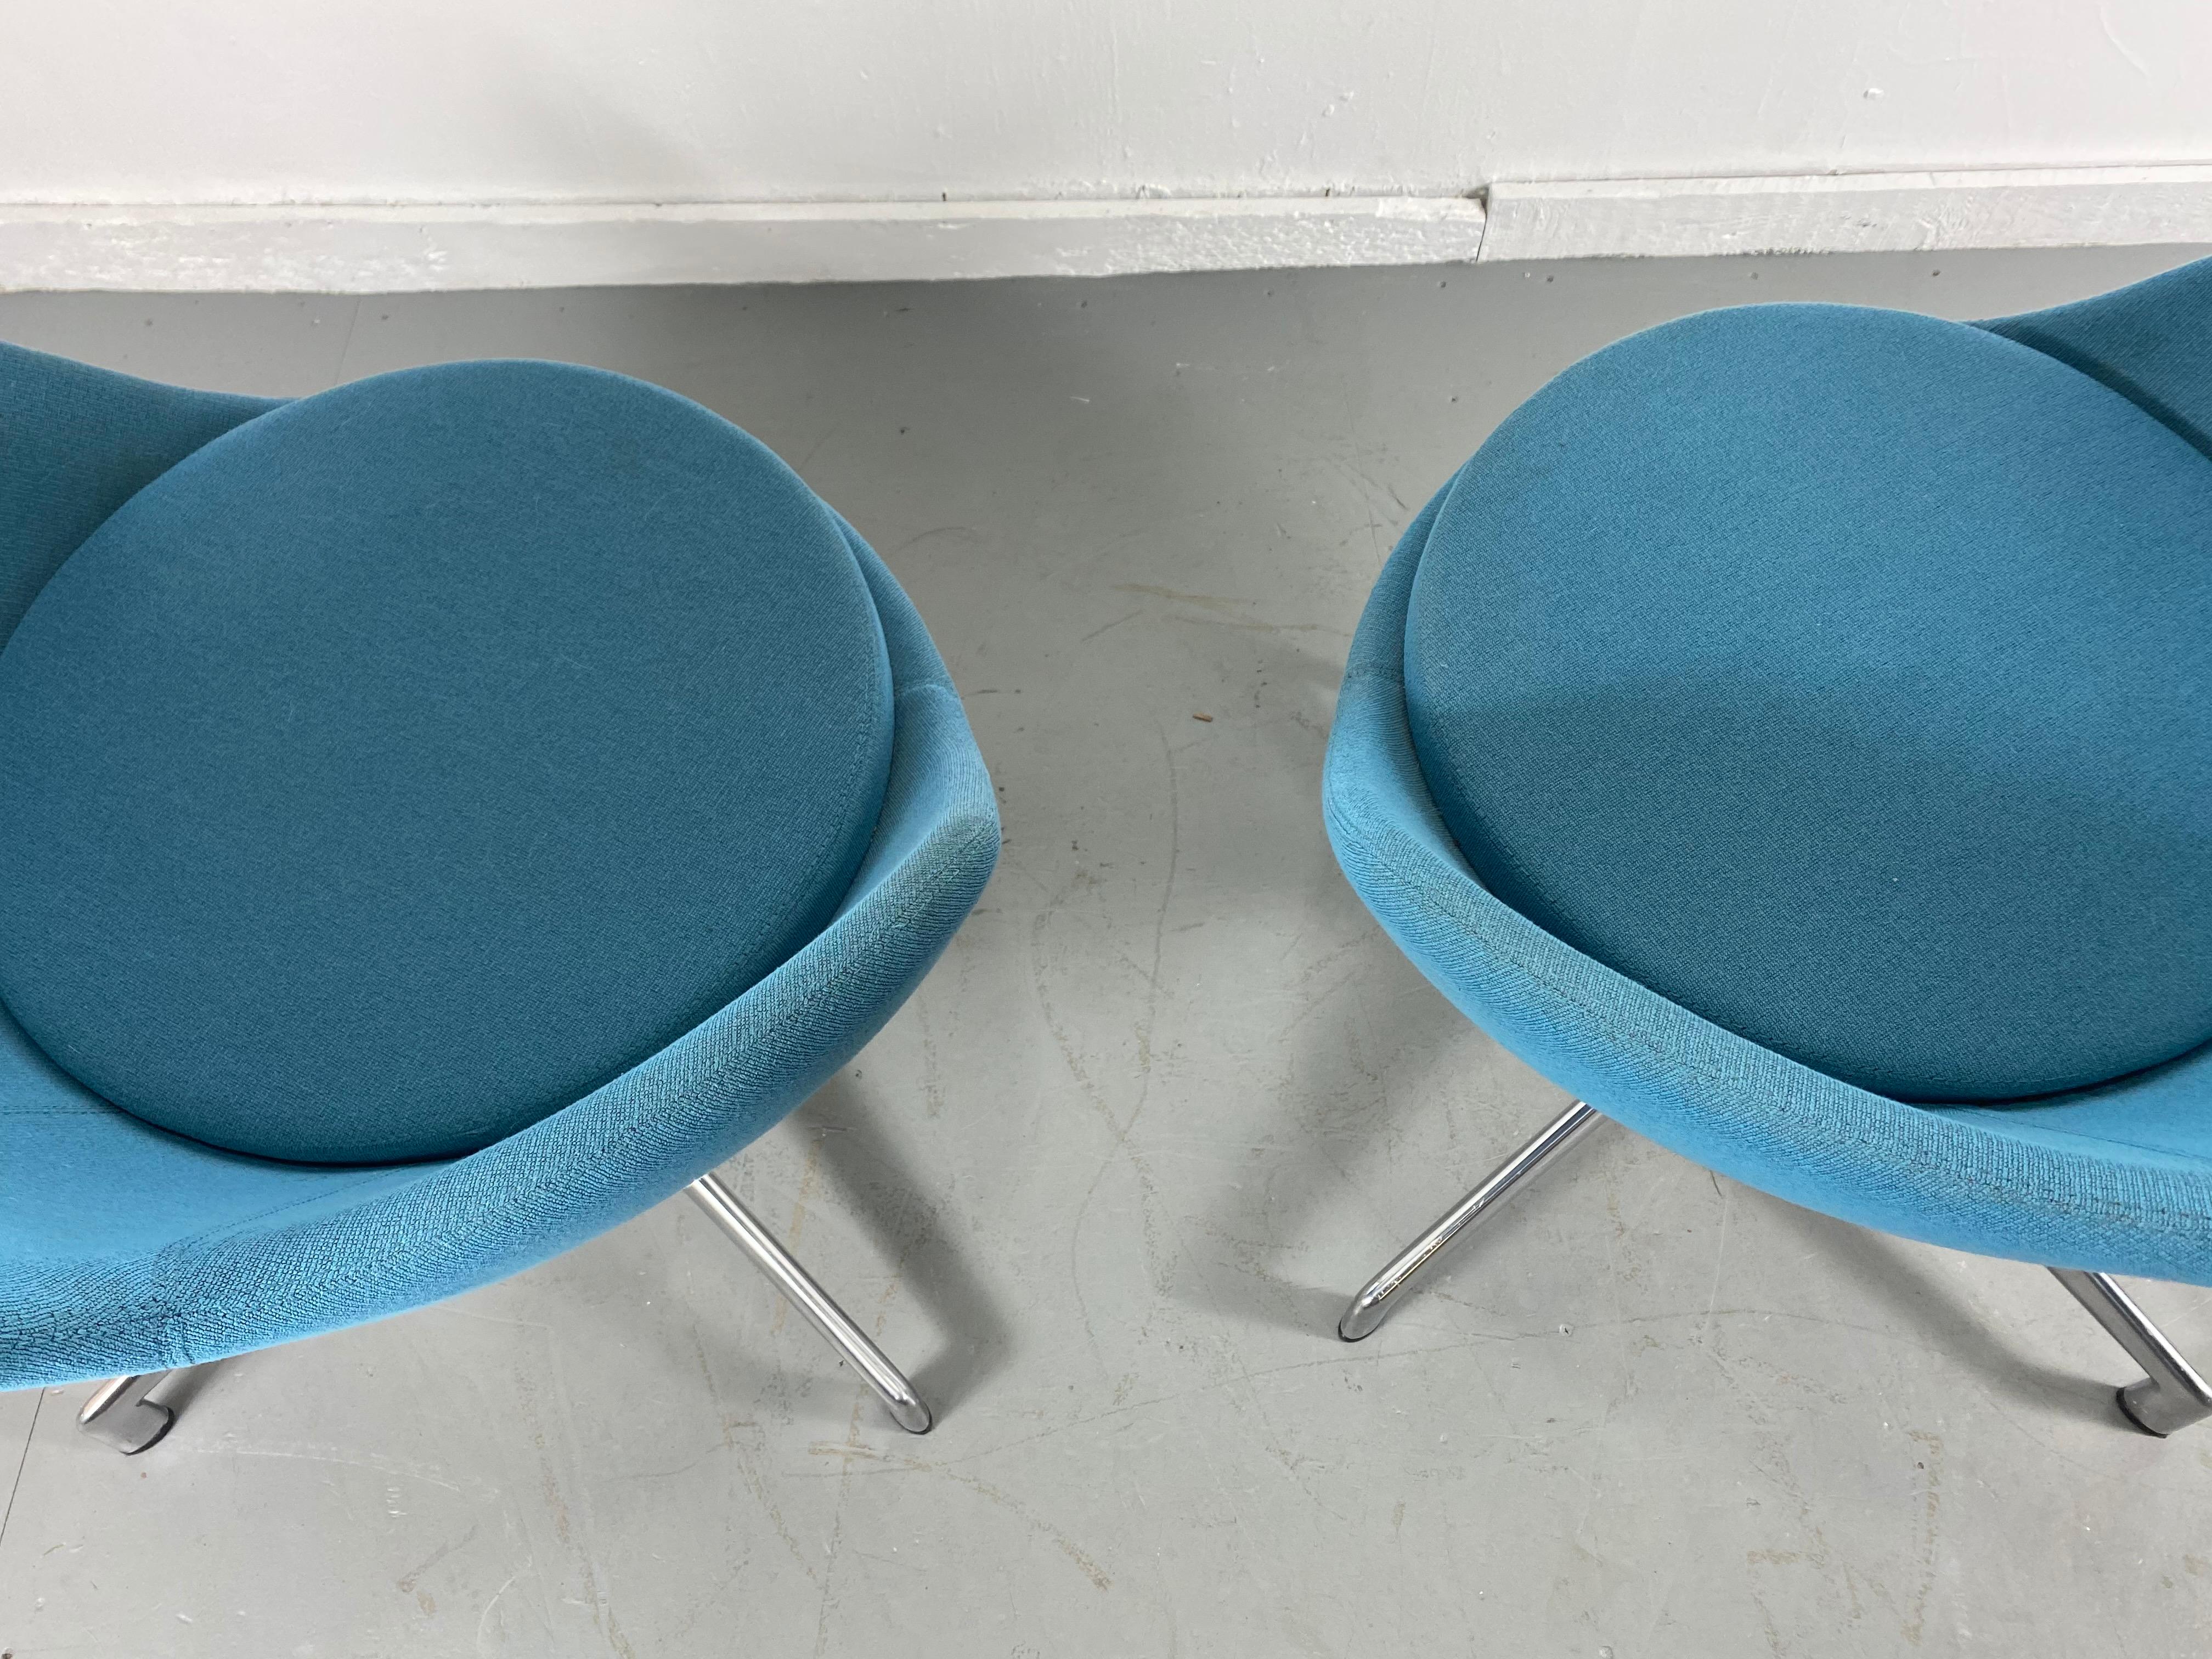 Canadian Pair of Post Modernist Lounge Chairs, Juxta Chair by Keilhauer